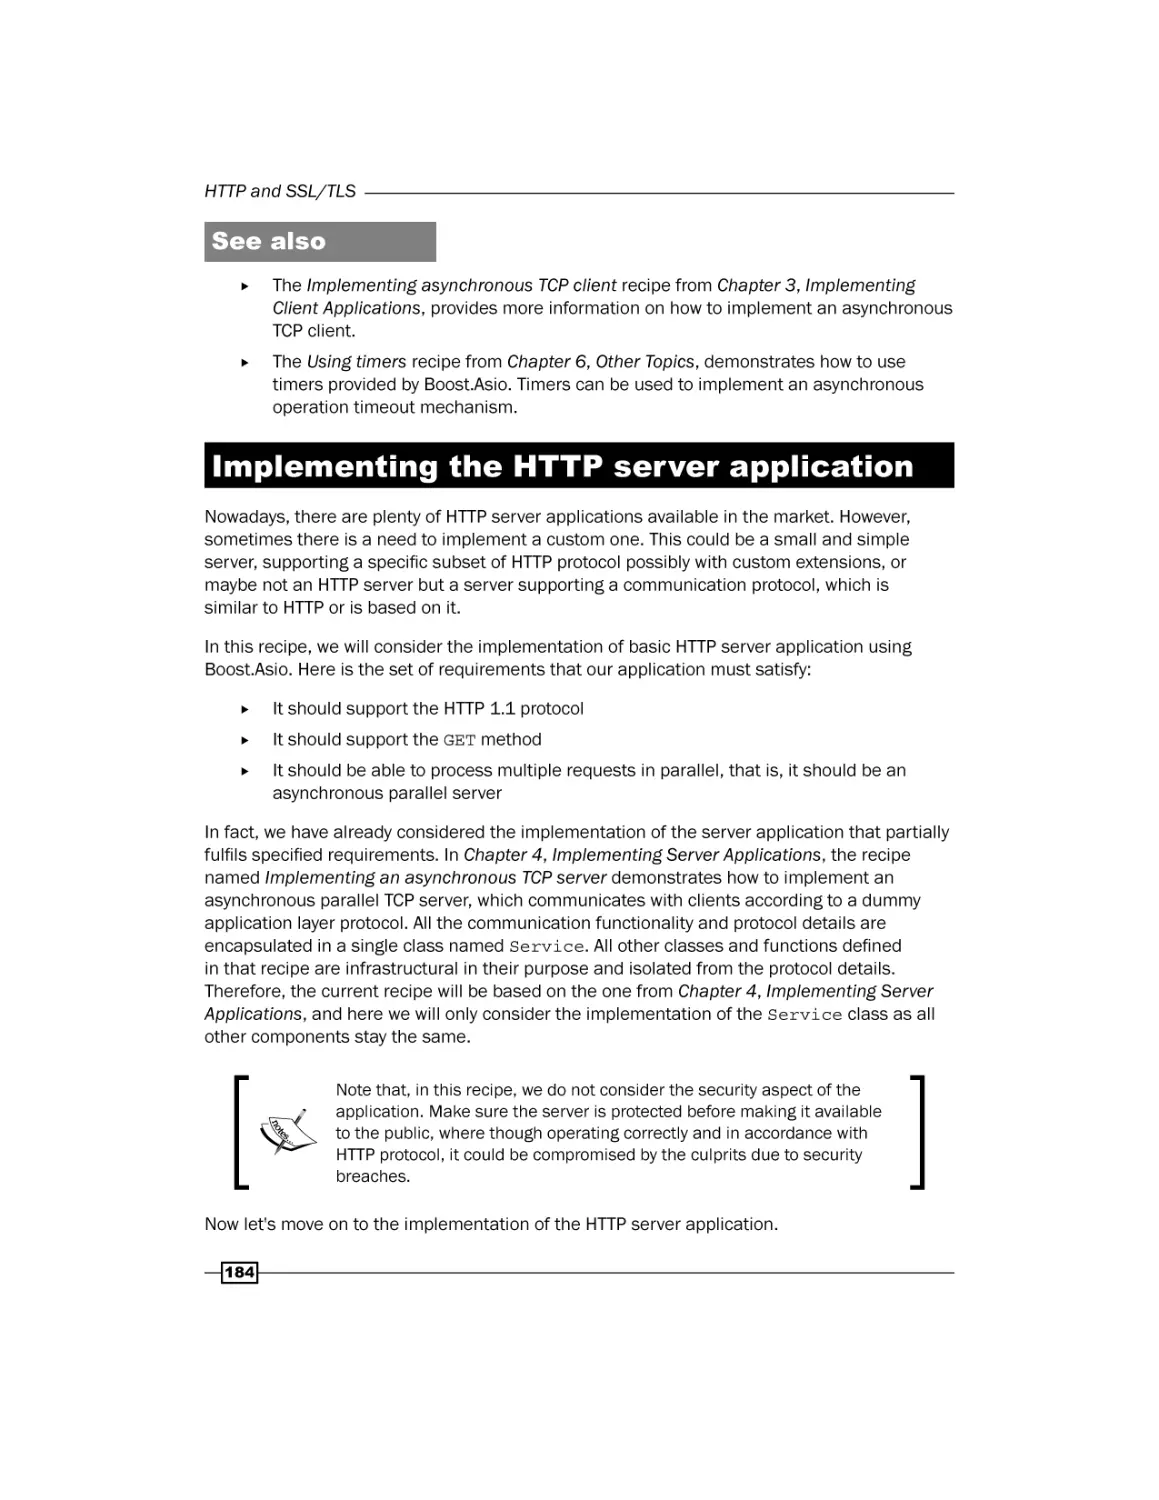 Implementing the HTTP server application